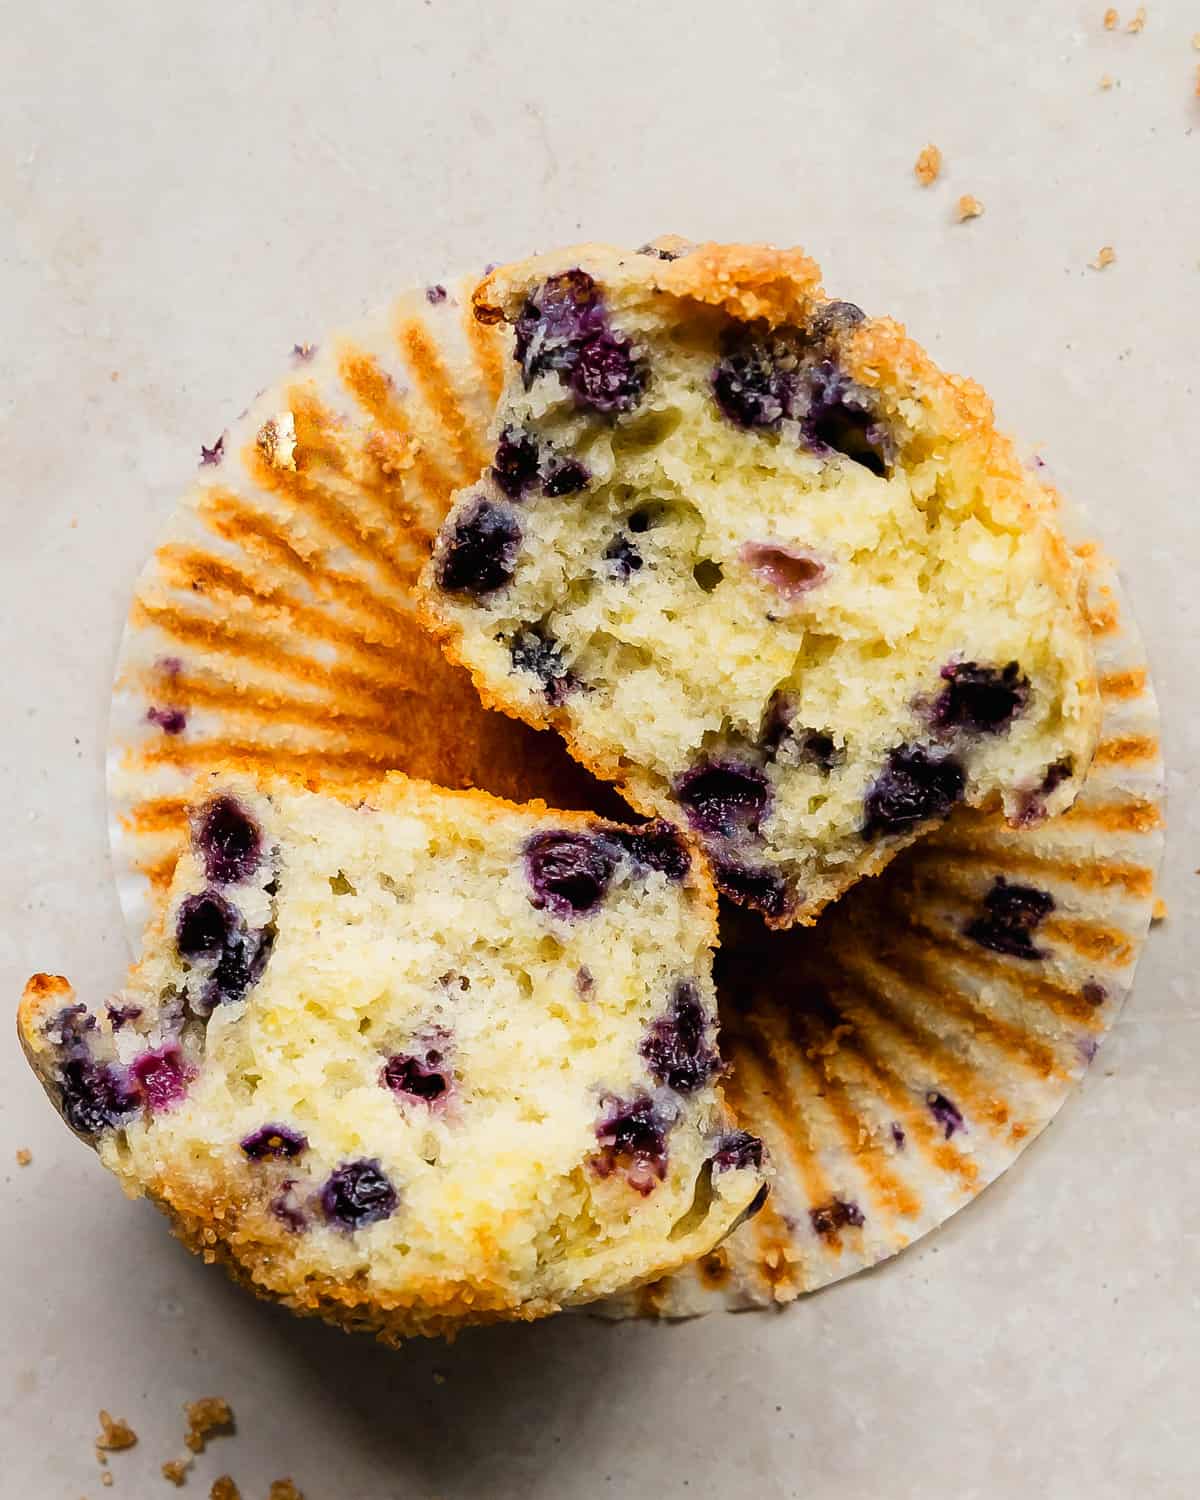 These buttermilk blueberry muffins are light, fluffy and incredibly moist buttermilk muffins filled with fresh blueberries. They’re bakery style muffins with beautiful tall, domed tops covered in crunchy bits of sparkling sugar.